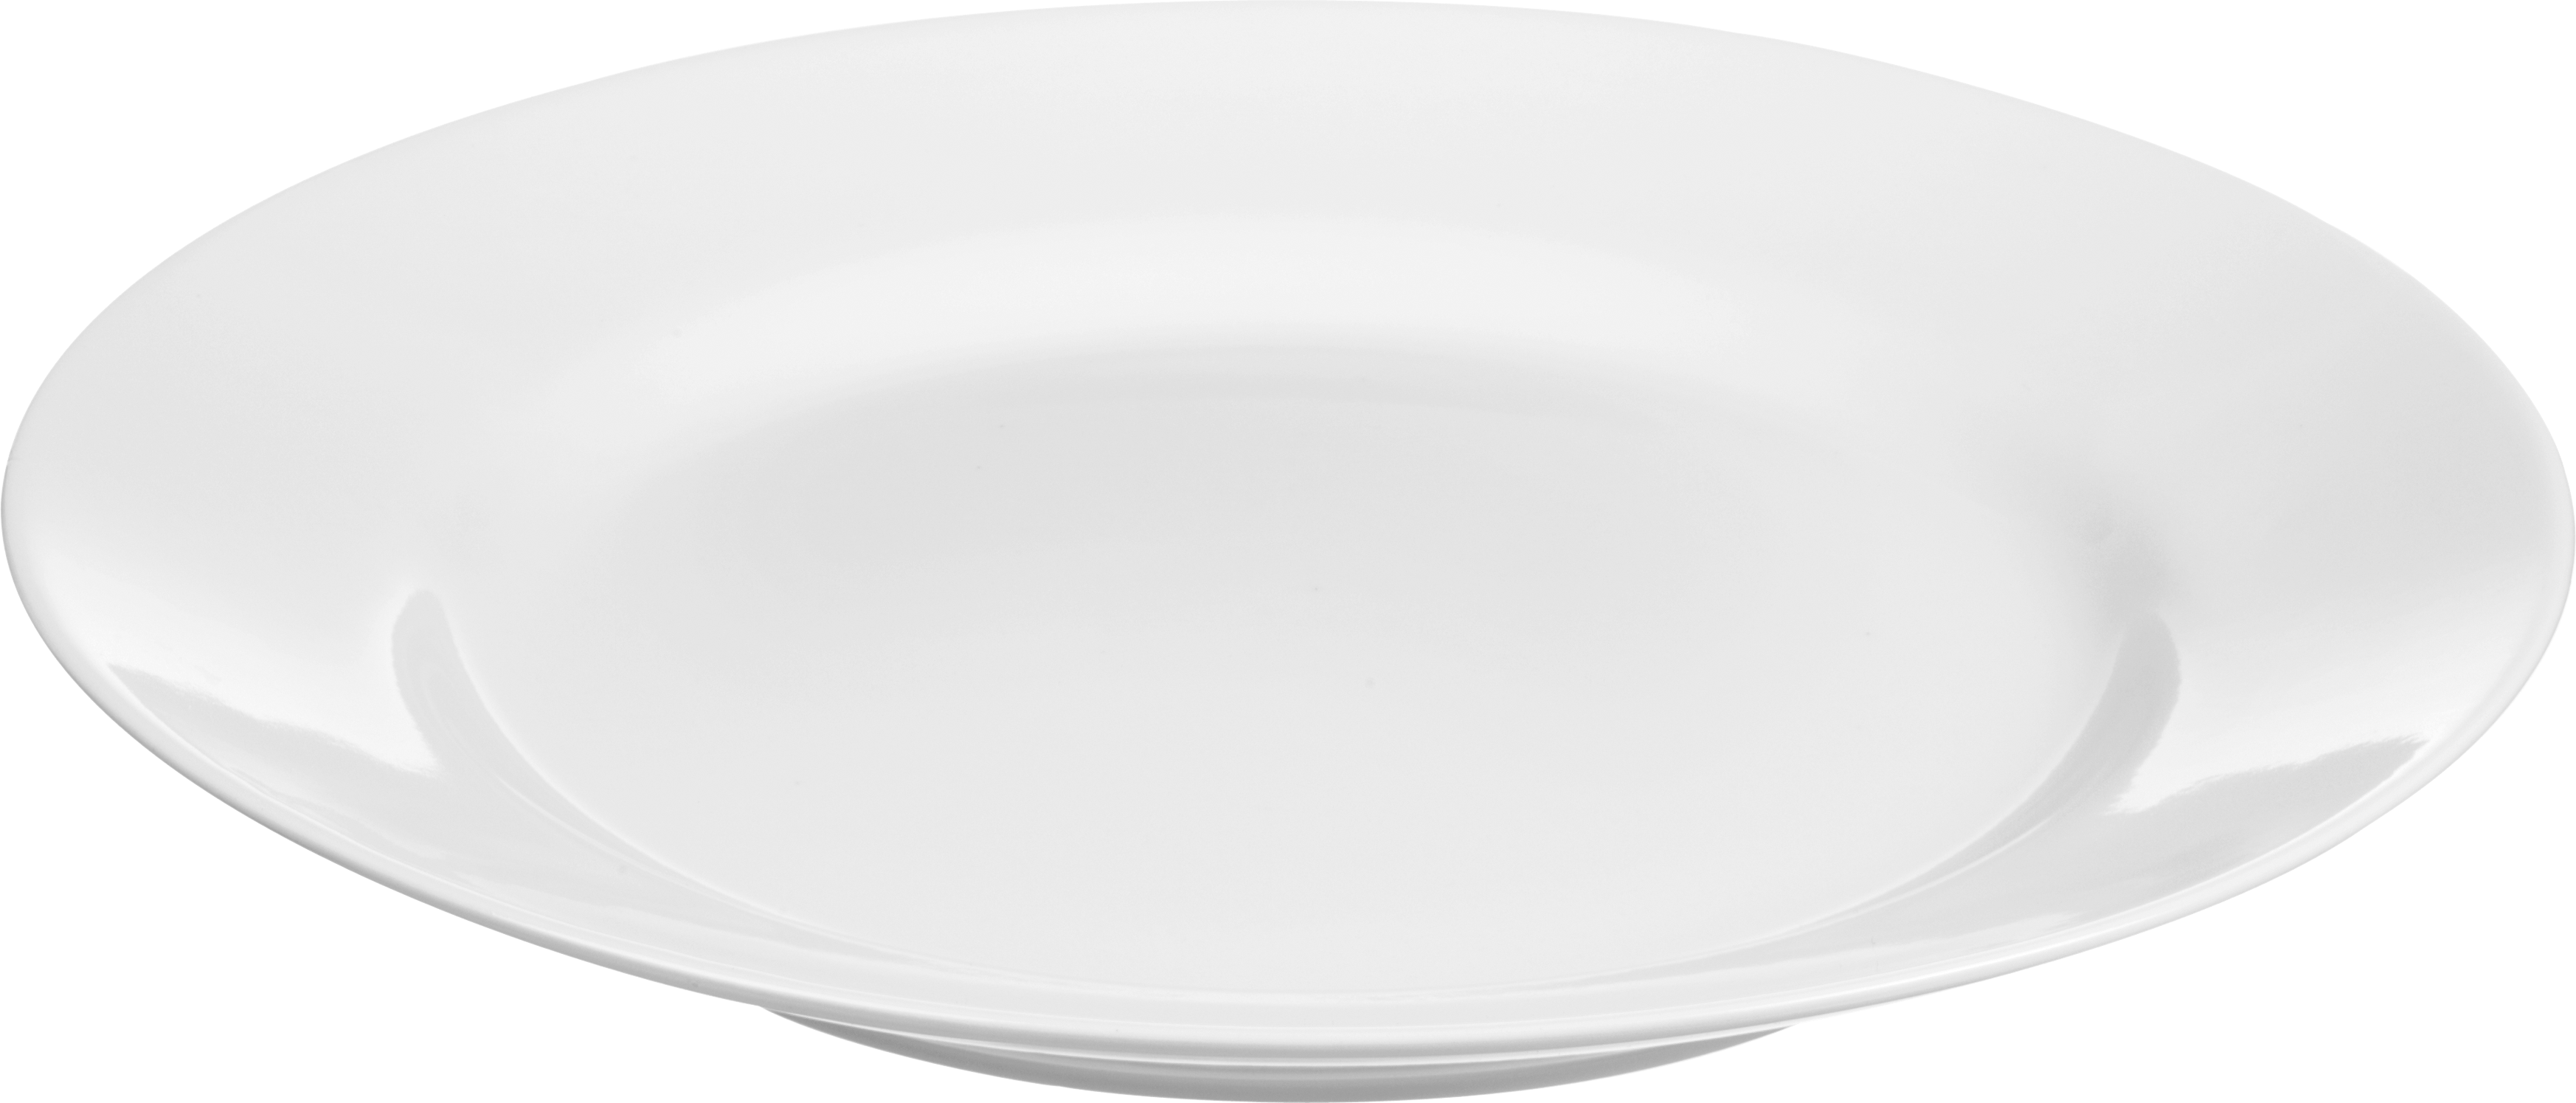 White Plate Png Image PNG Image